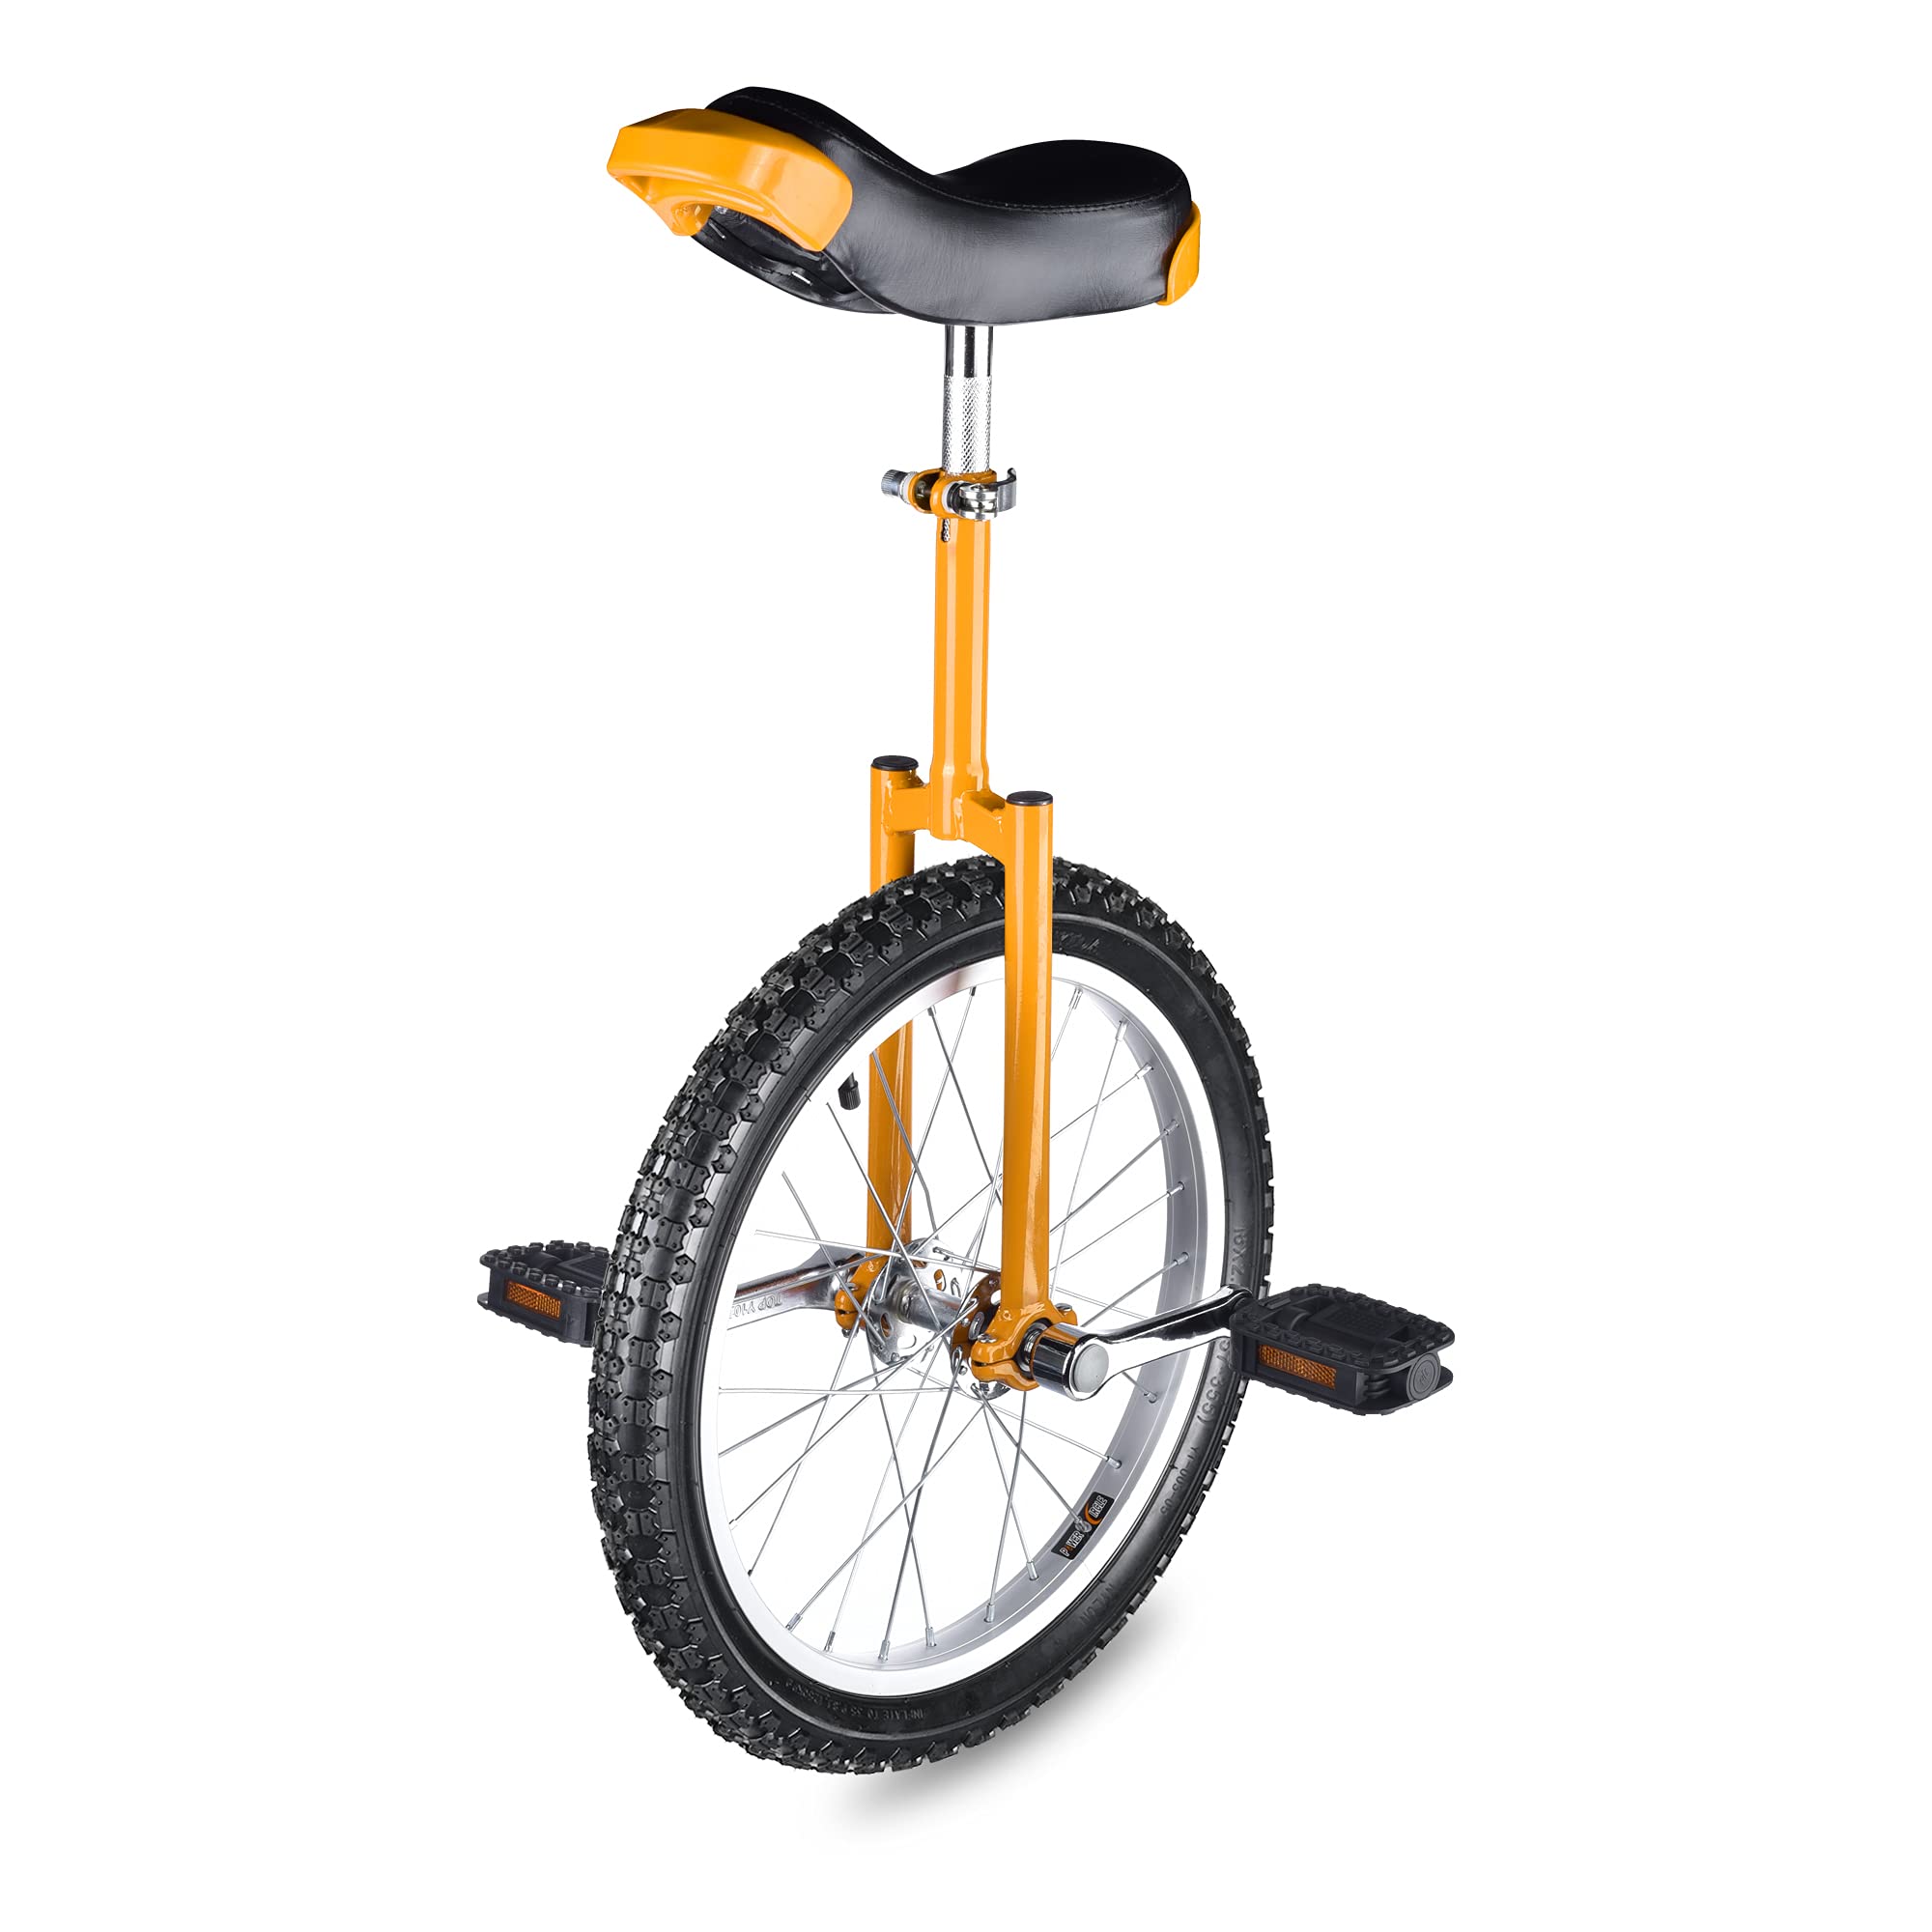 AW 16" Inch Wheel Unicycle Leakproof Butyl Tire Wheel Cycling Outdoor Sports Fitness Exercise Health Yellow